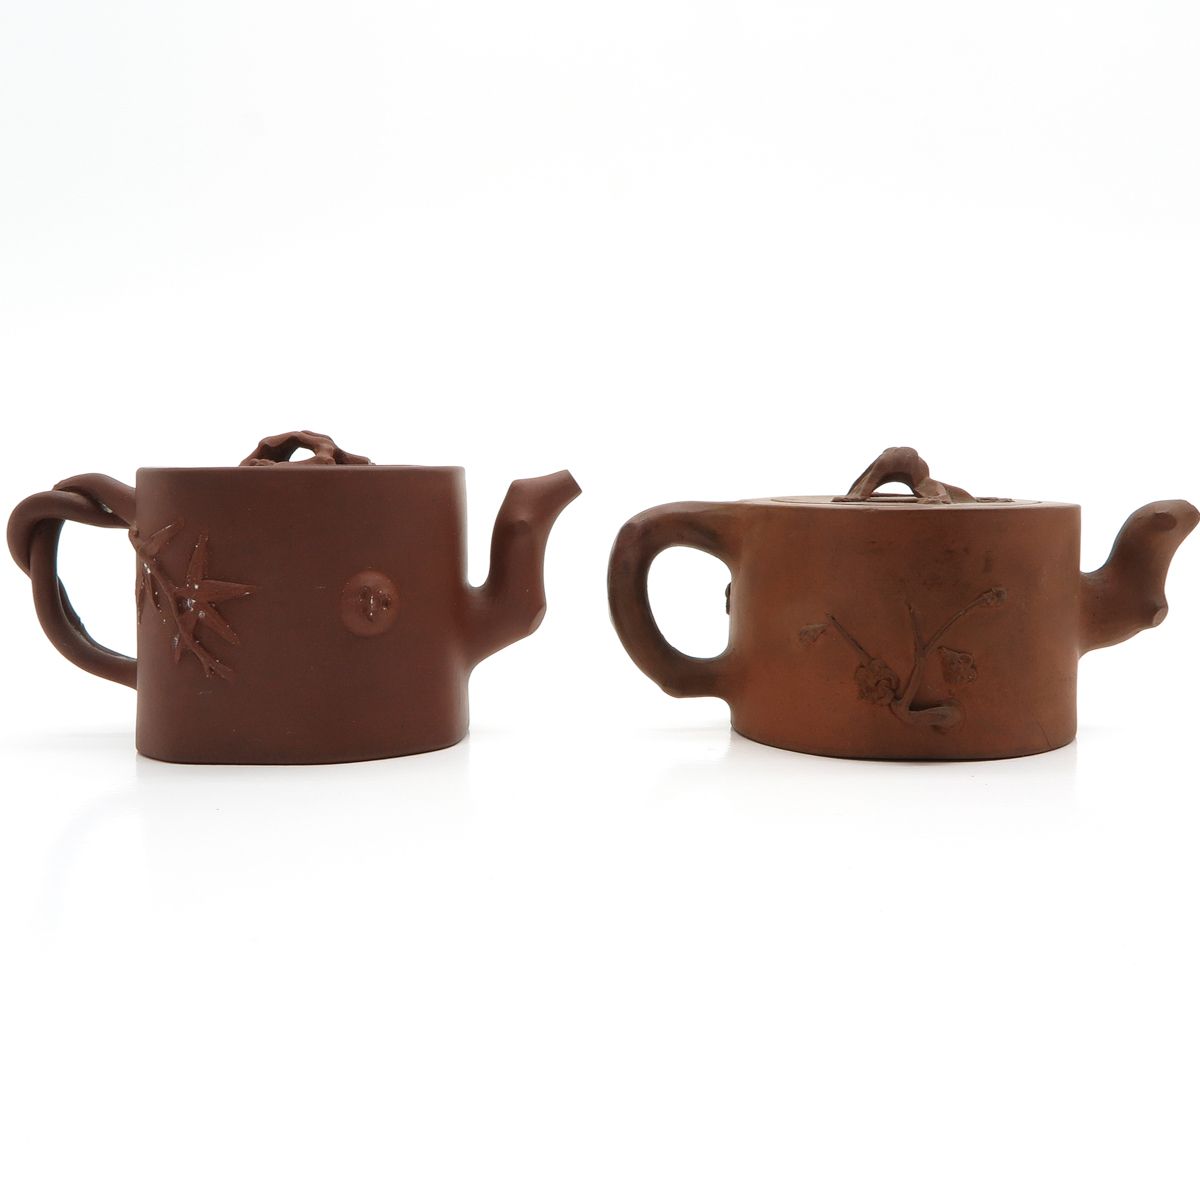 Lot of 2 Chinese Yixing Teapots - Image 3 of 8